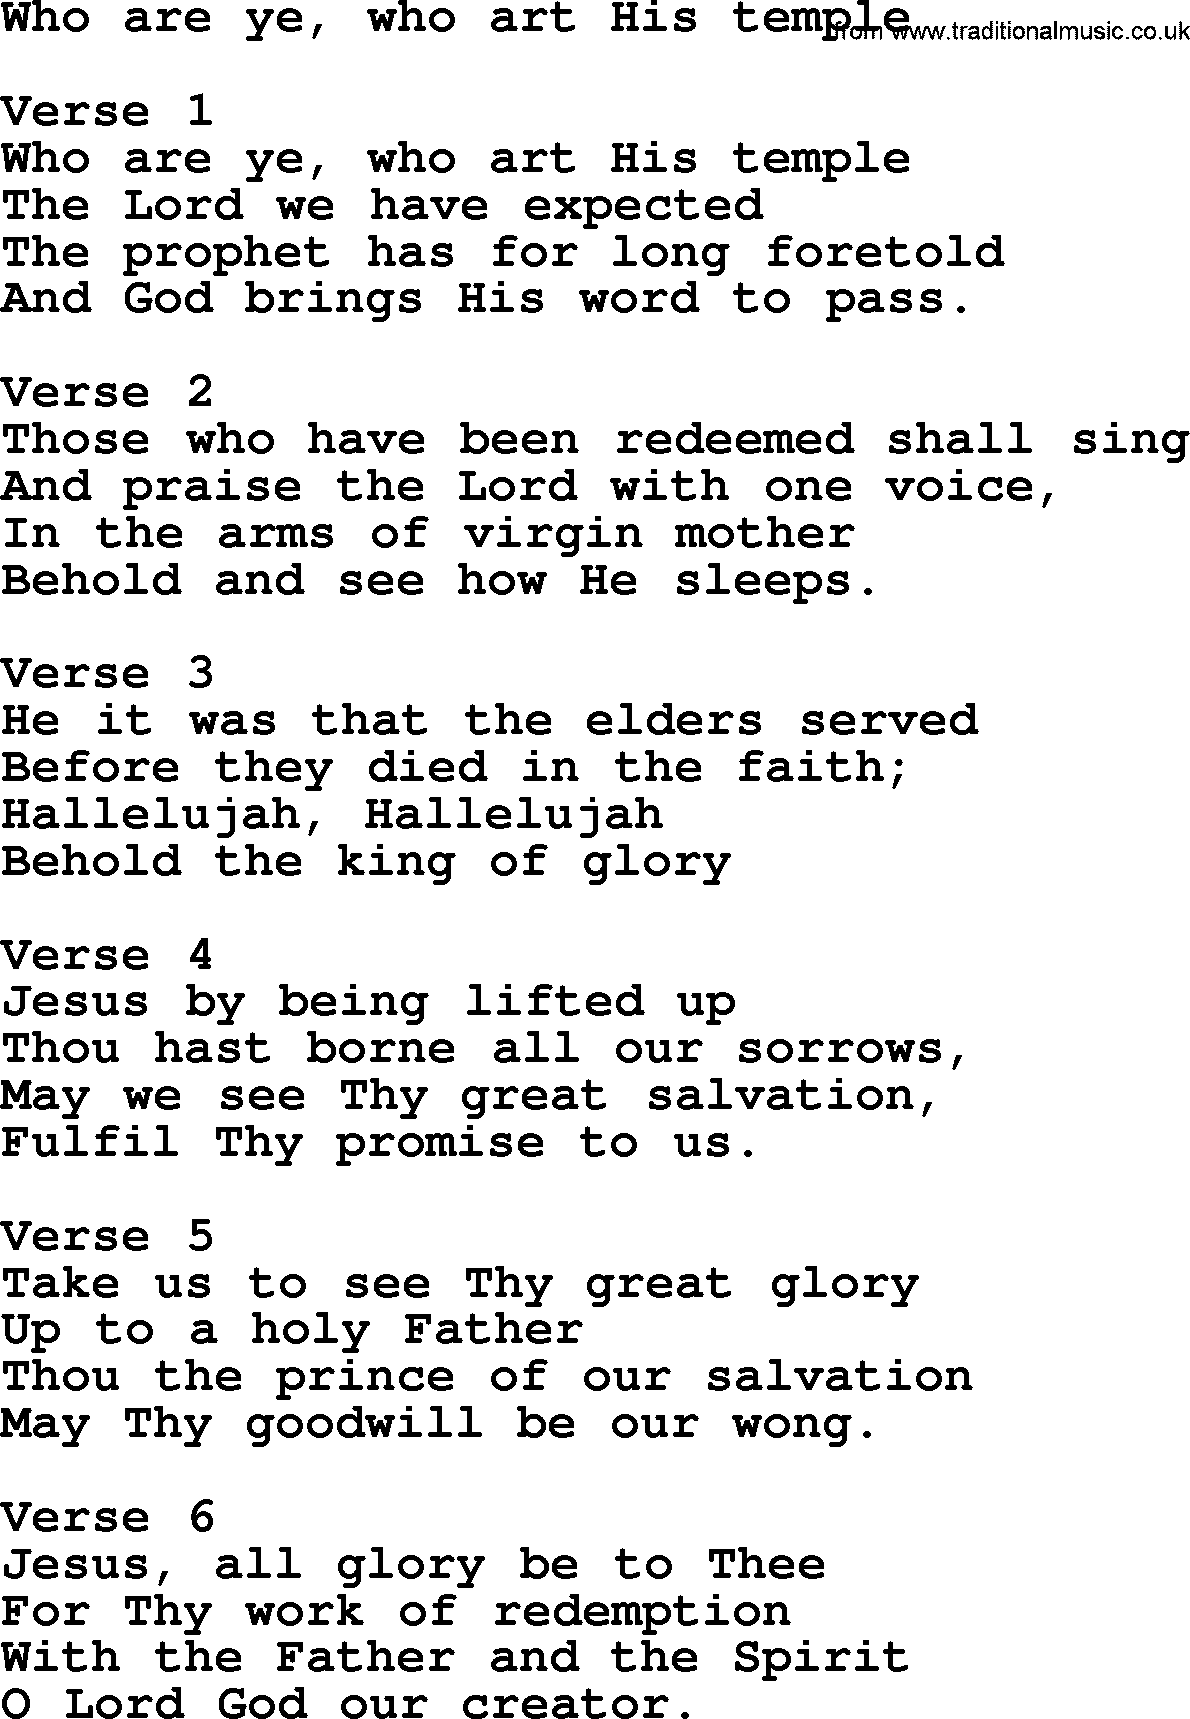 Apostolic and Pentecostal Hymns and Gospel Songs, Hymn: Who Are Ye, Who Art His Temple, Christian lyrics and PDF